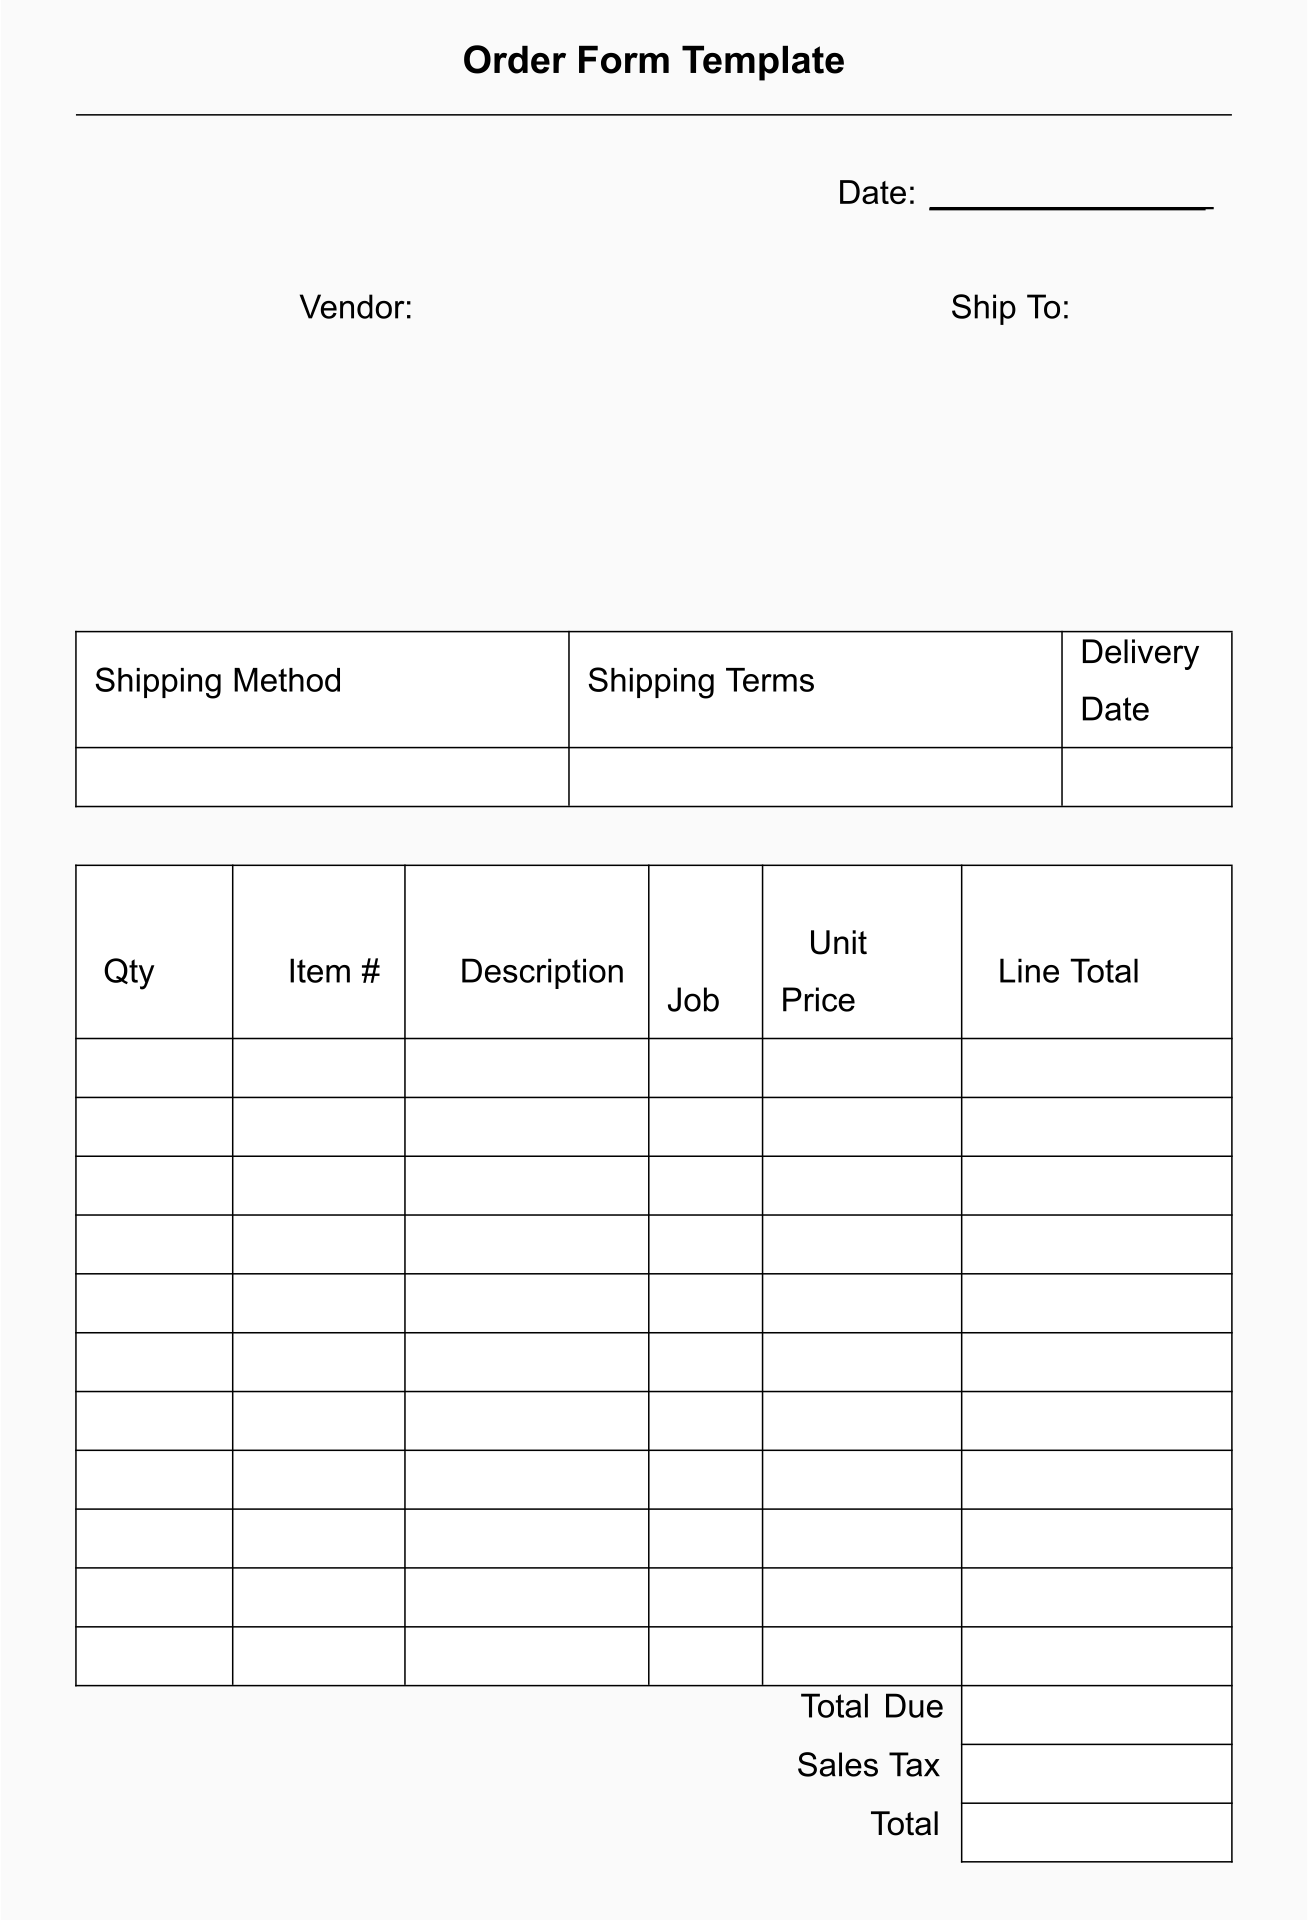 9-best-images-of-free-printable-blank-order-forms-free-9-best-images